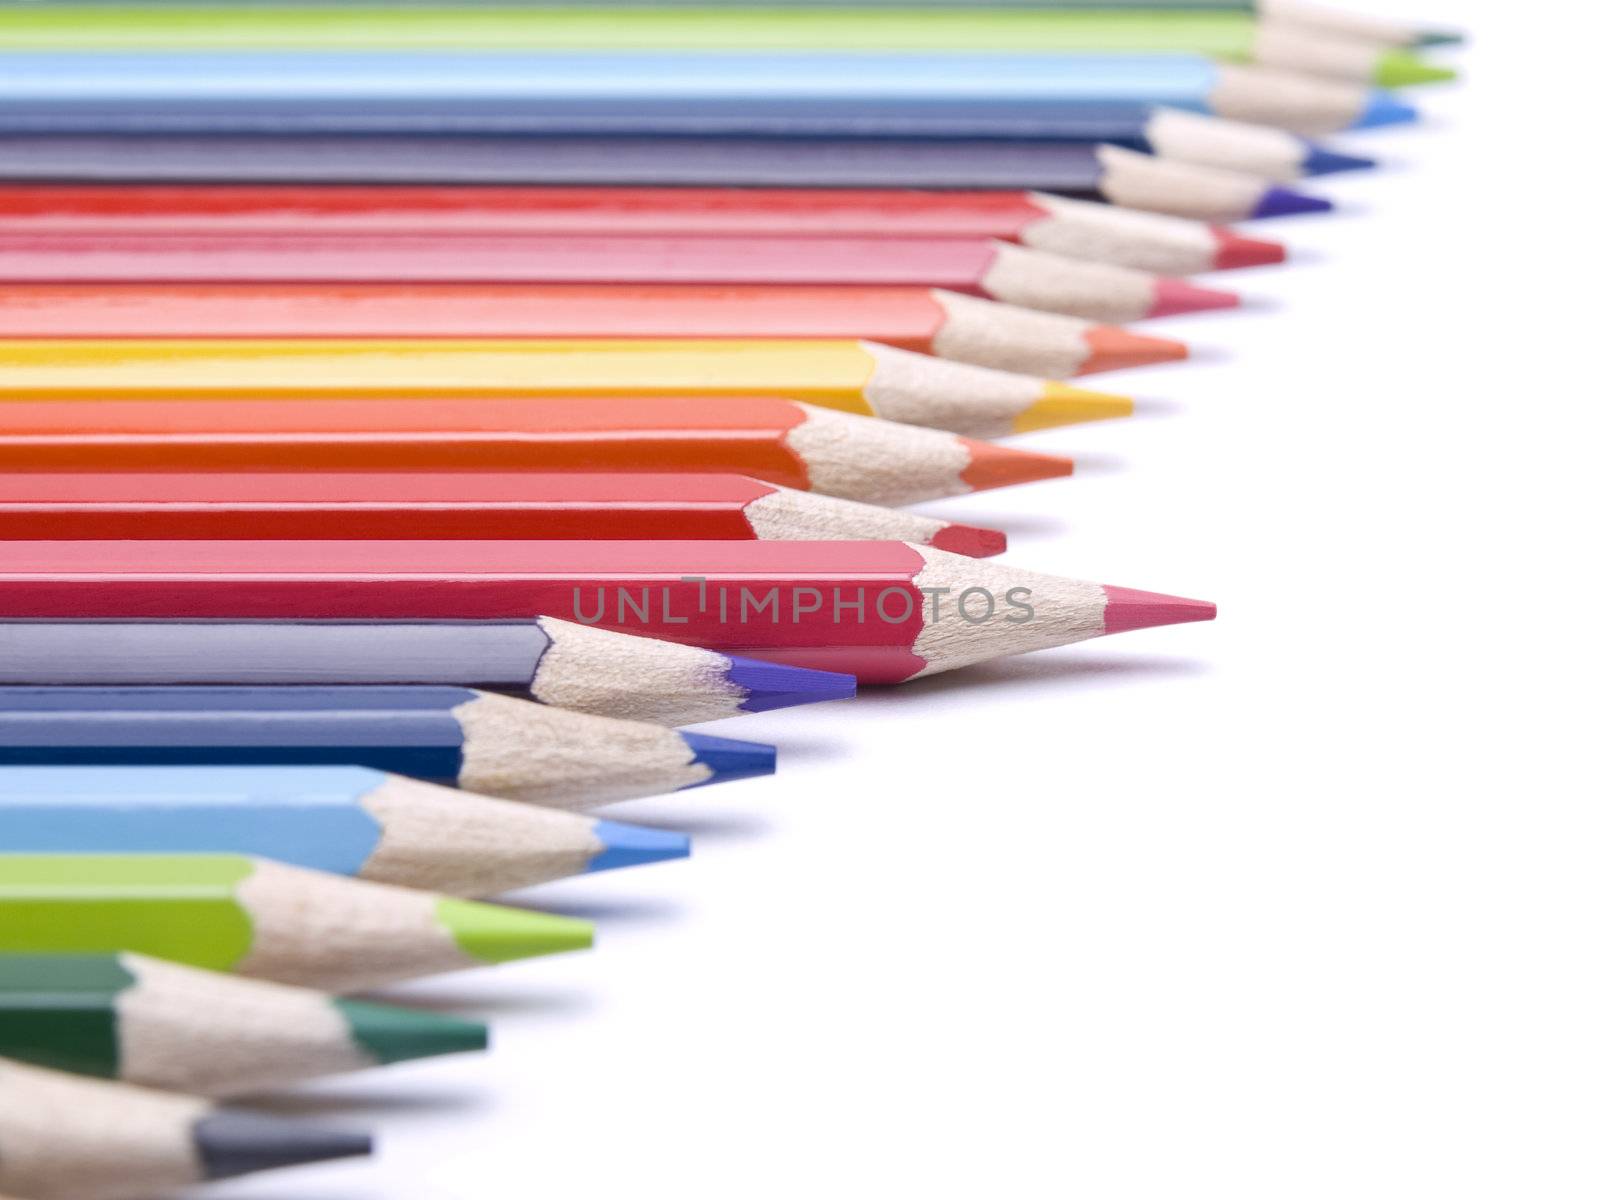 A red pencil comes out from the row of color pencils.